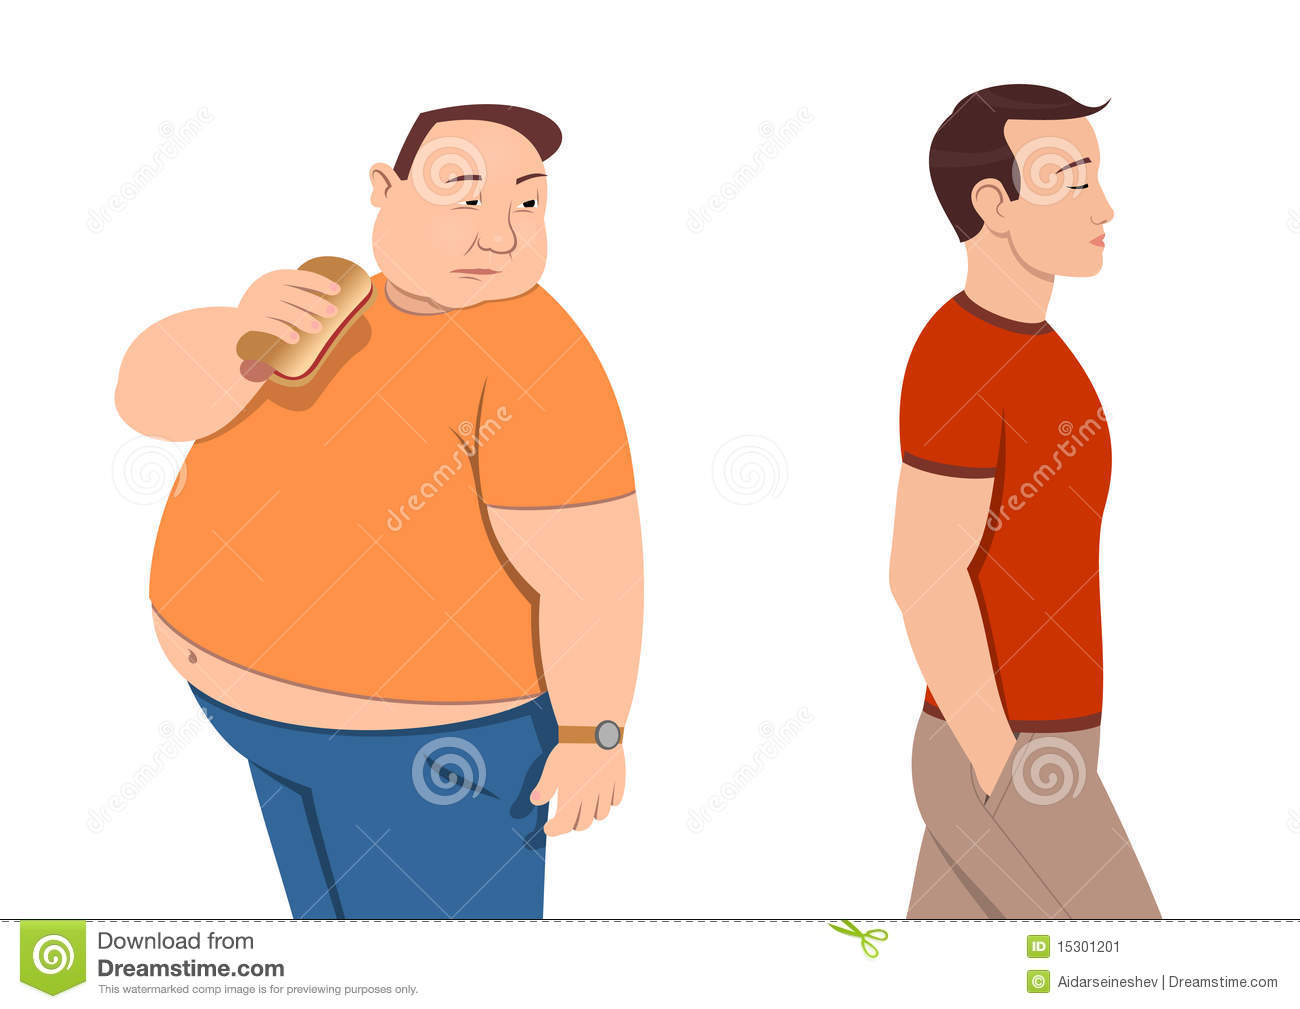 Overweight Stock Image   Image  15301201